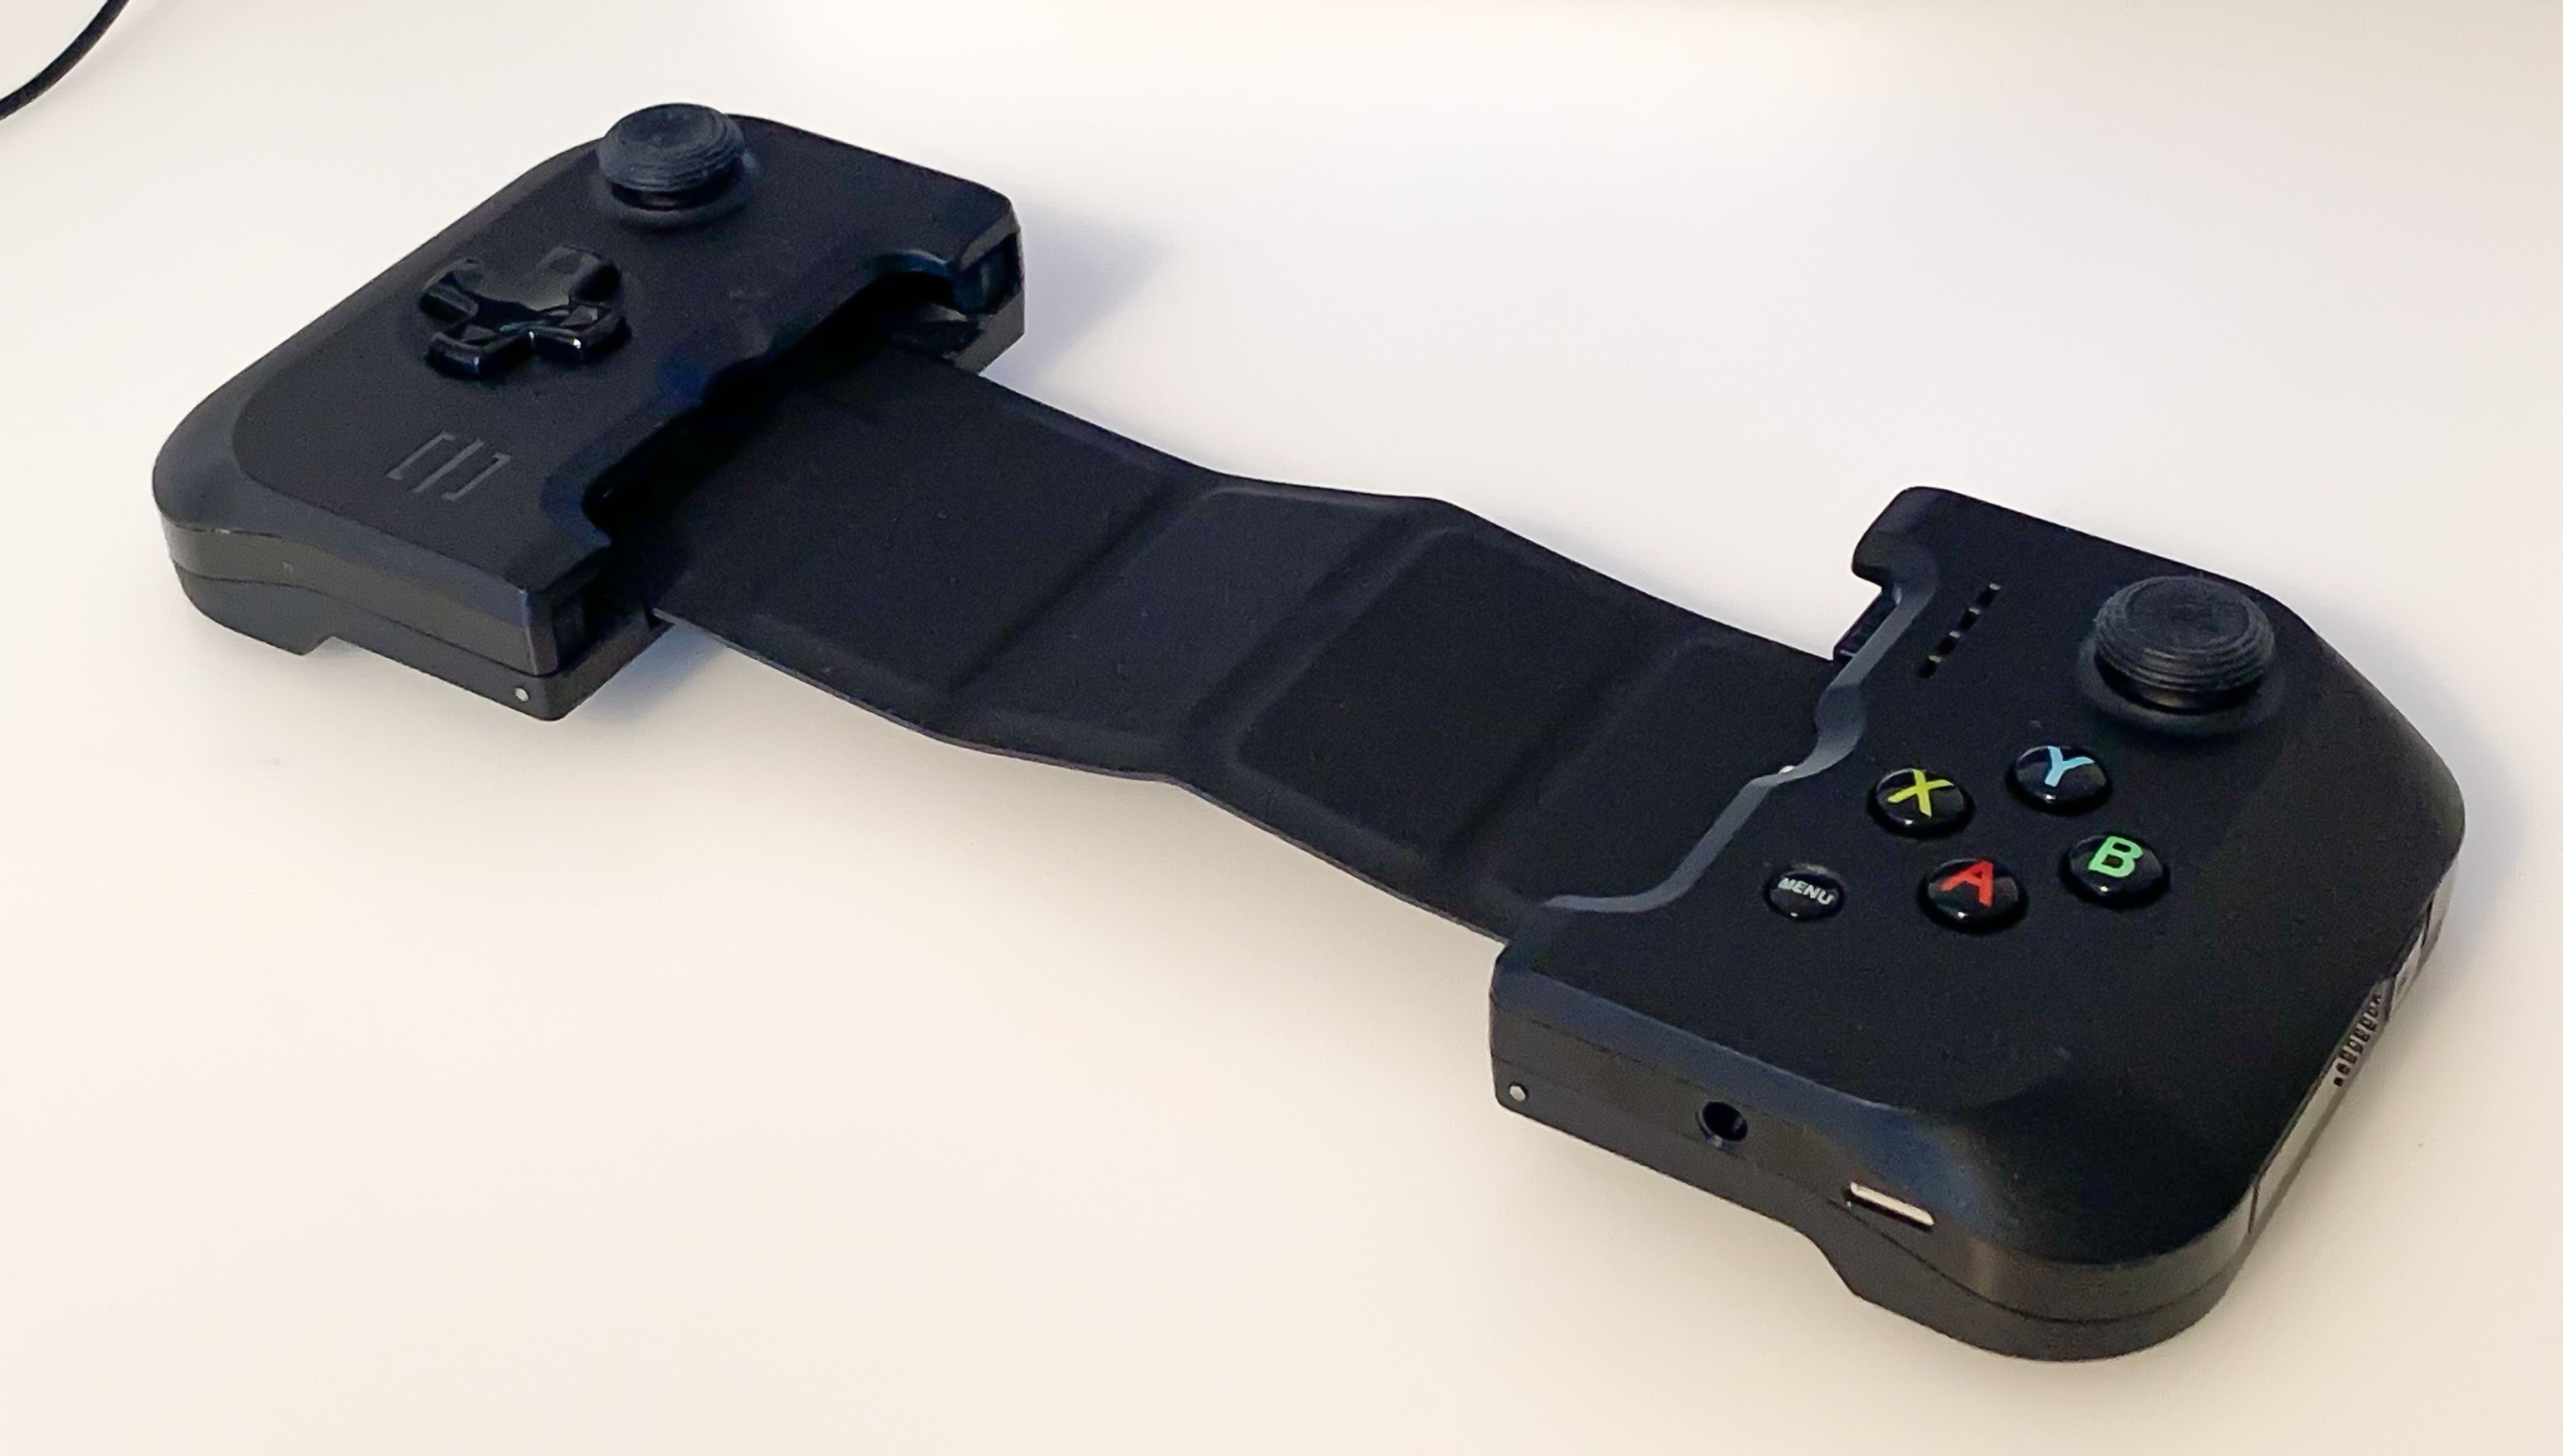 The Gamevice works with almost any iPhone, but cases aren't welcome